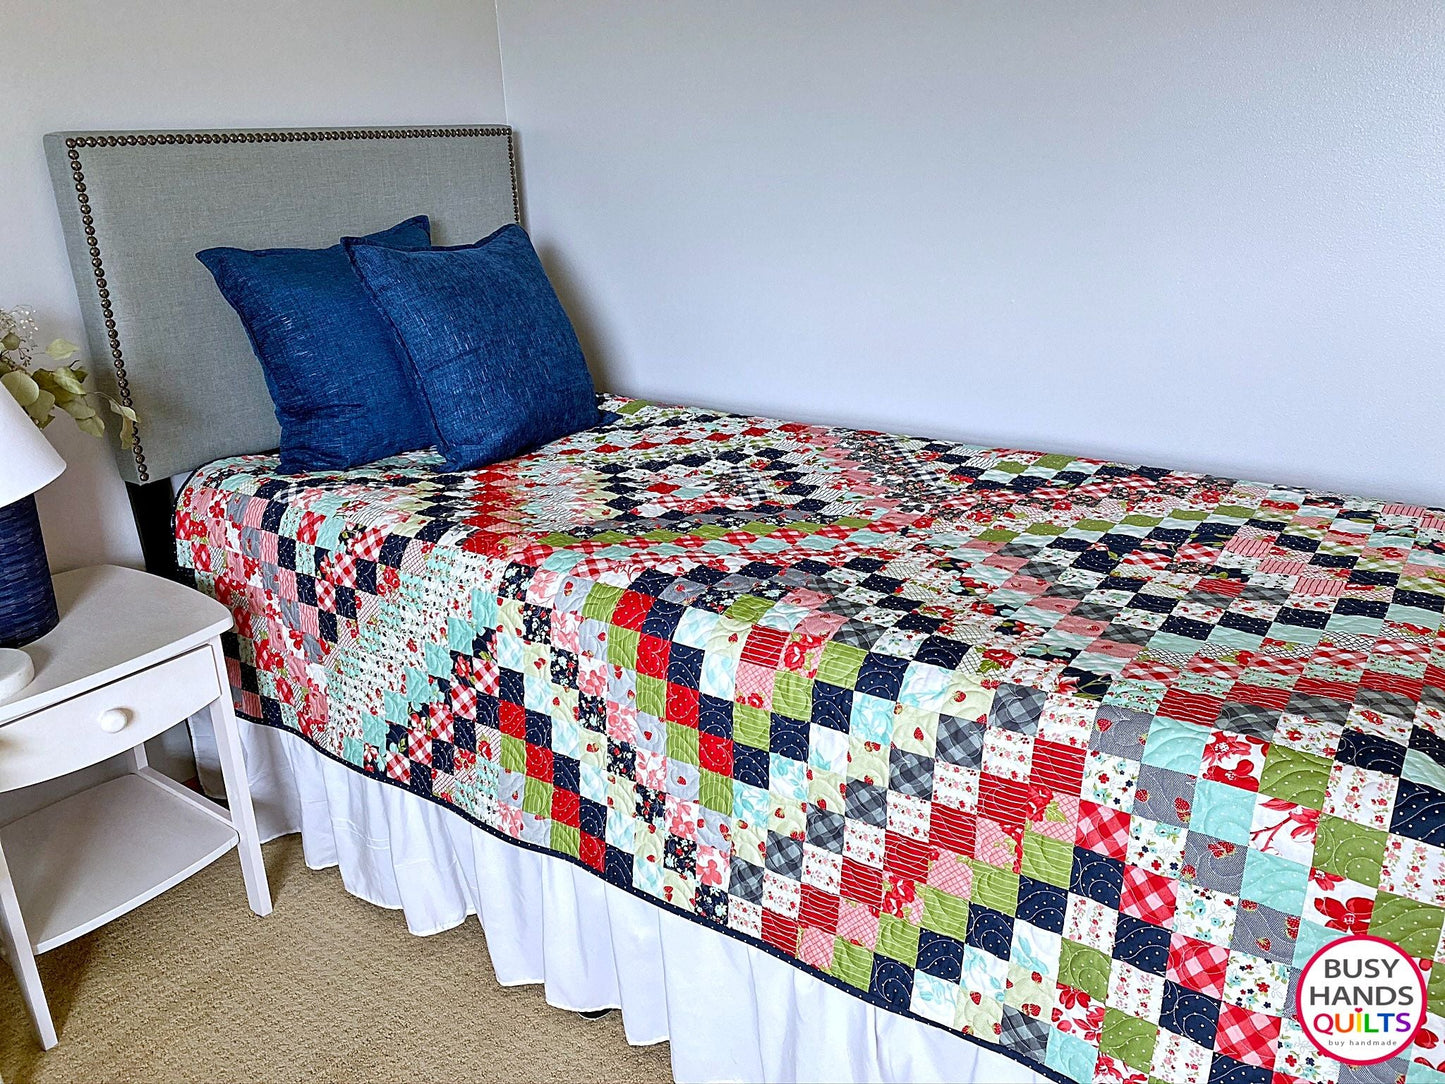 Scrappy Goodness Quilt Pattern PDF DOWNLOAD Busy Hands Quilts $12.99